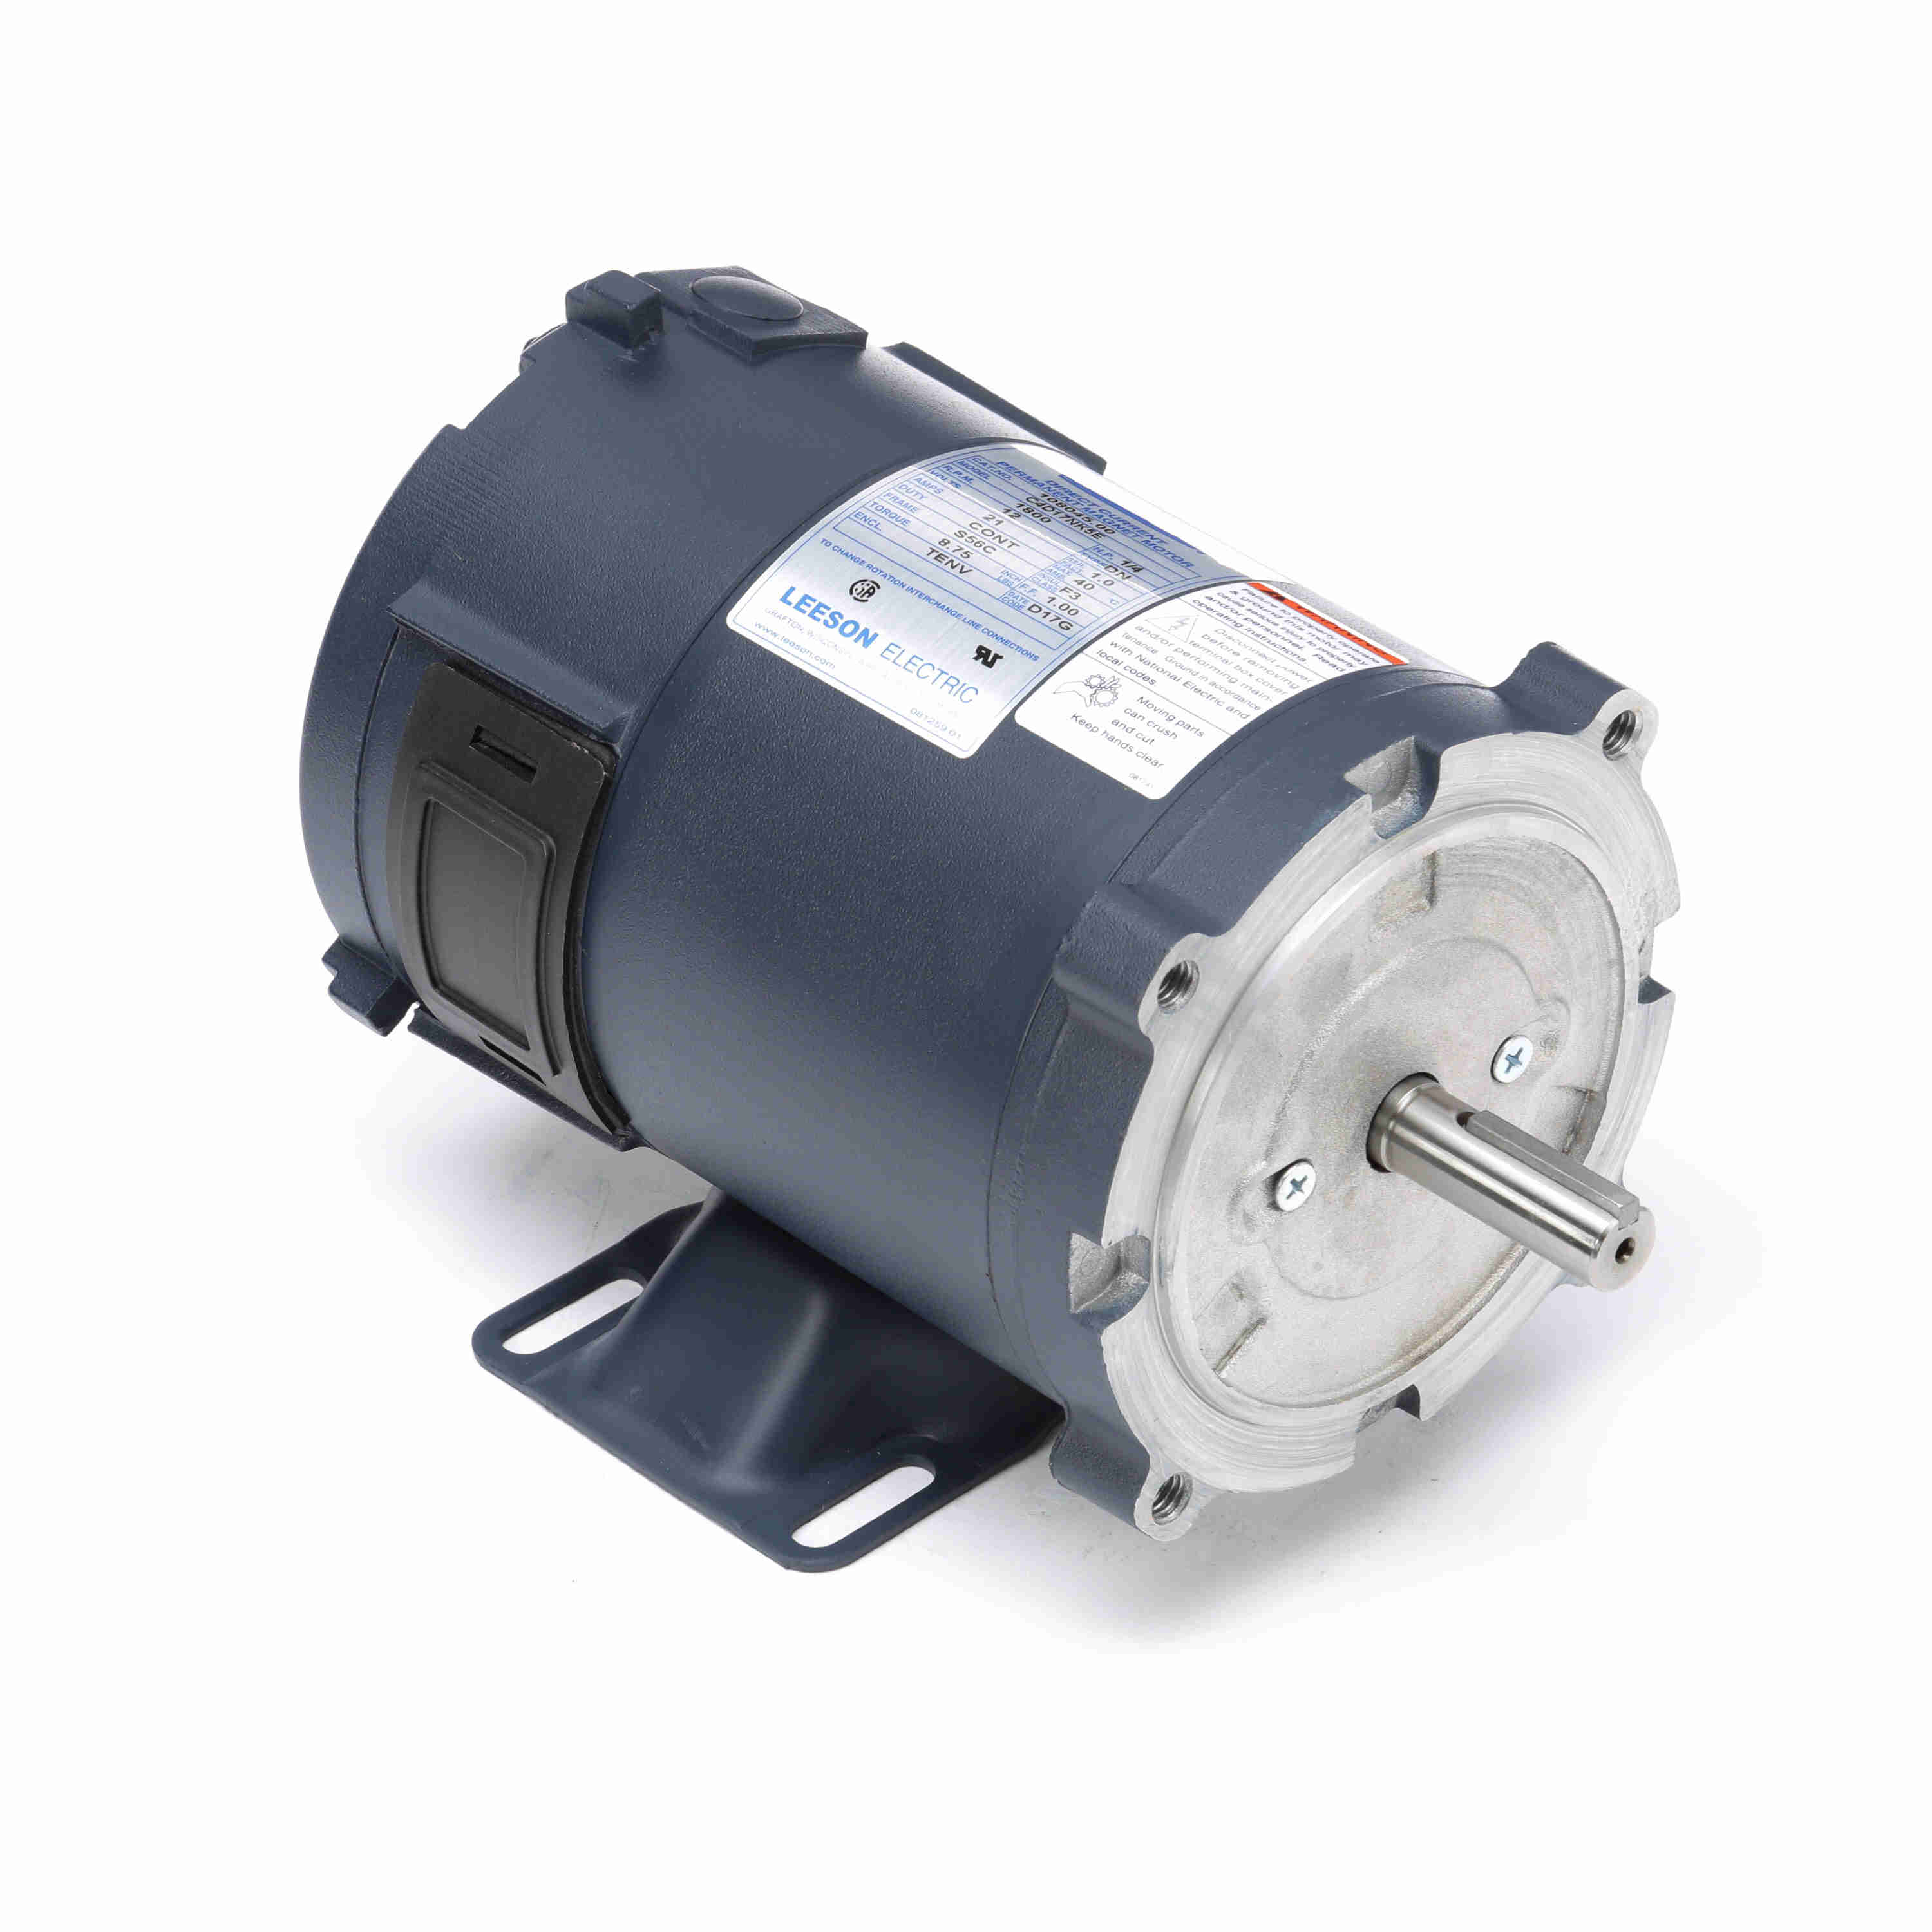 108045.00 Leeson 0.25HP Low Voltage DC Electric Motor, 1800RPM 1